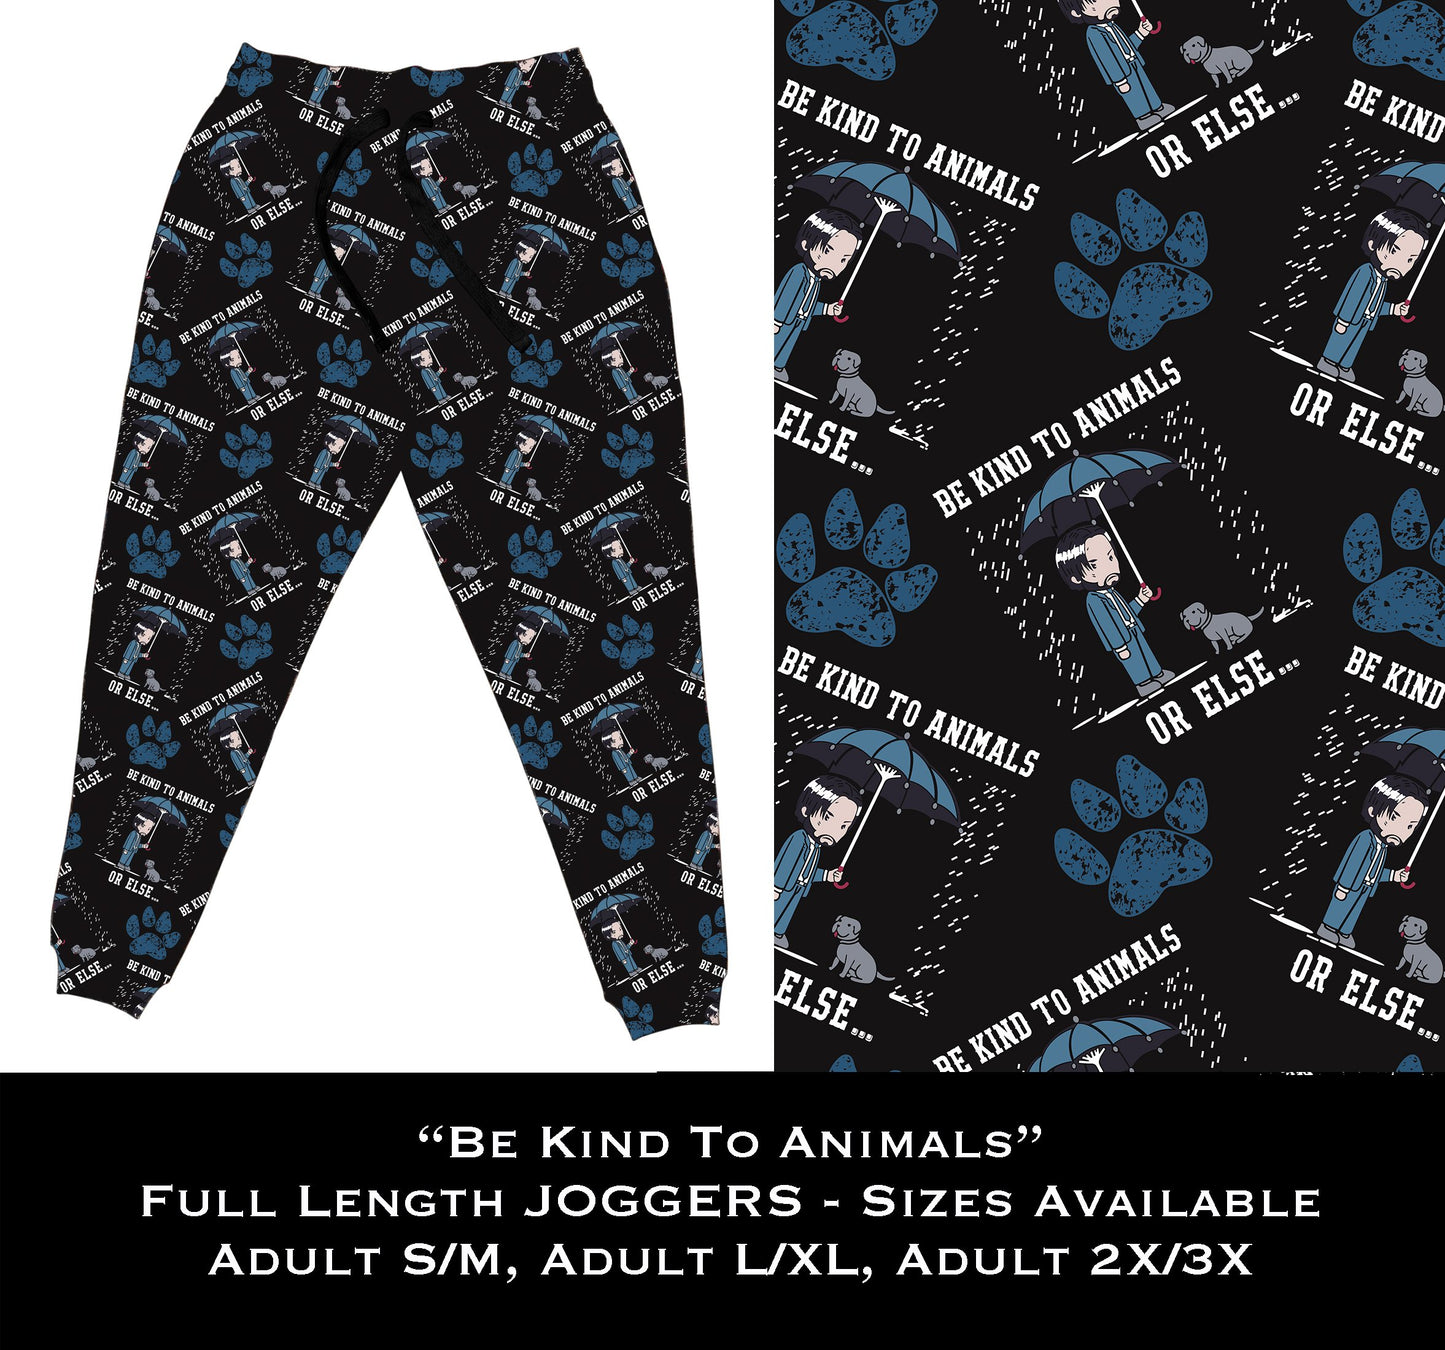 Be Kind to Animals - Full Joggers